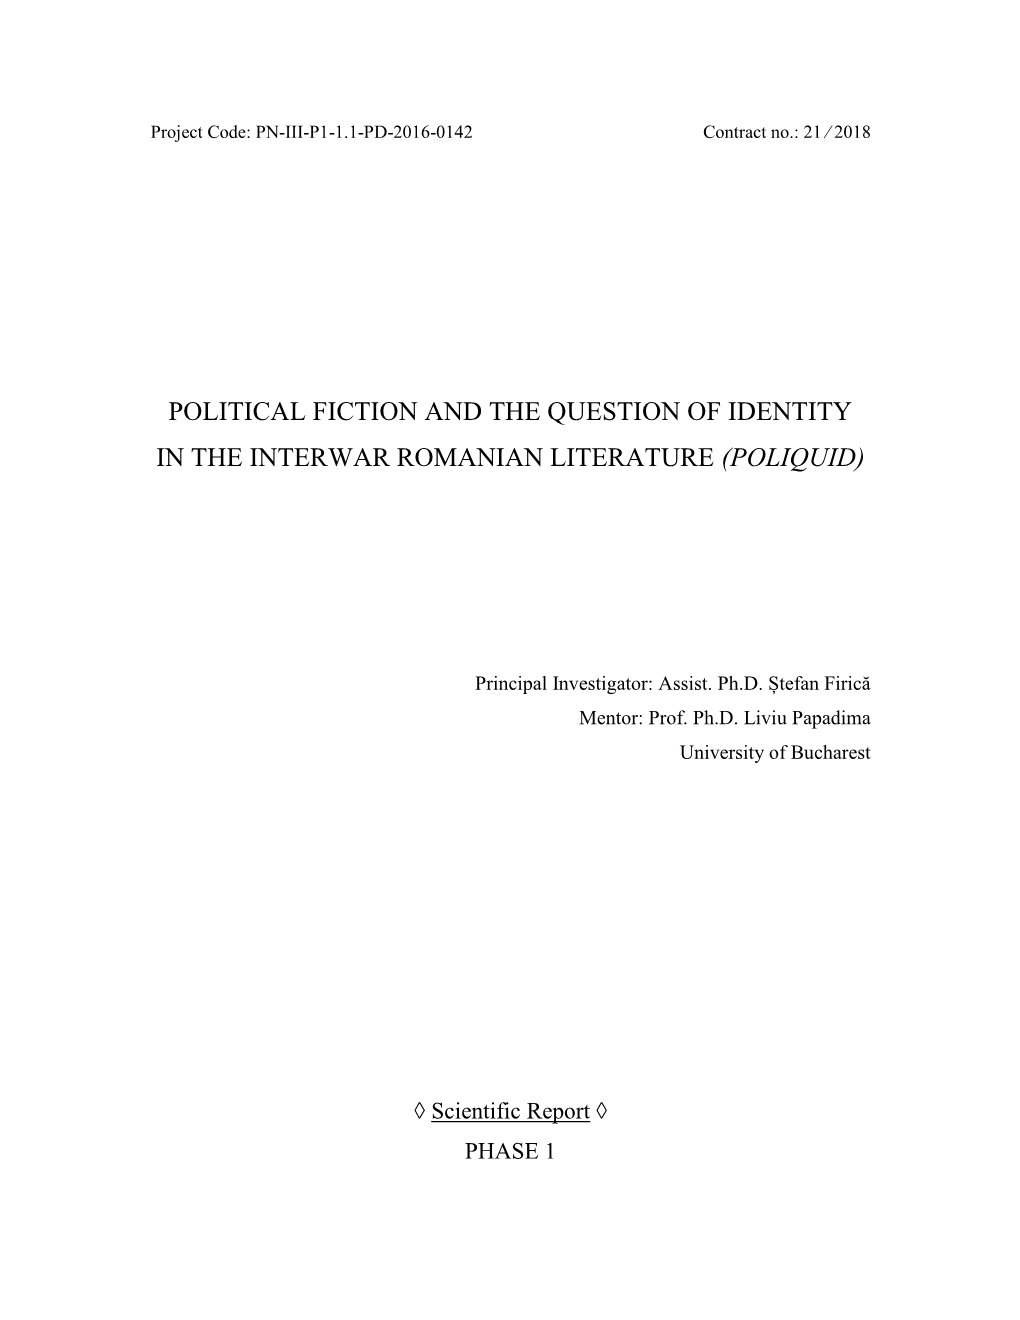 Political Fiction and the Question of Identity in the Interwar Romanian Literature (Poliquid)